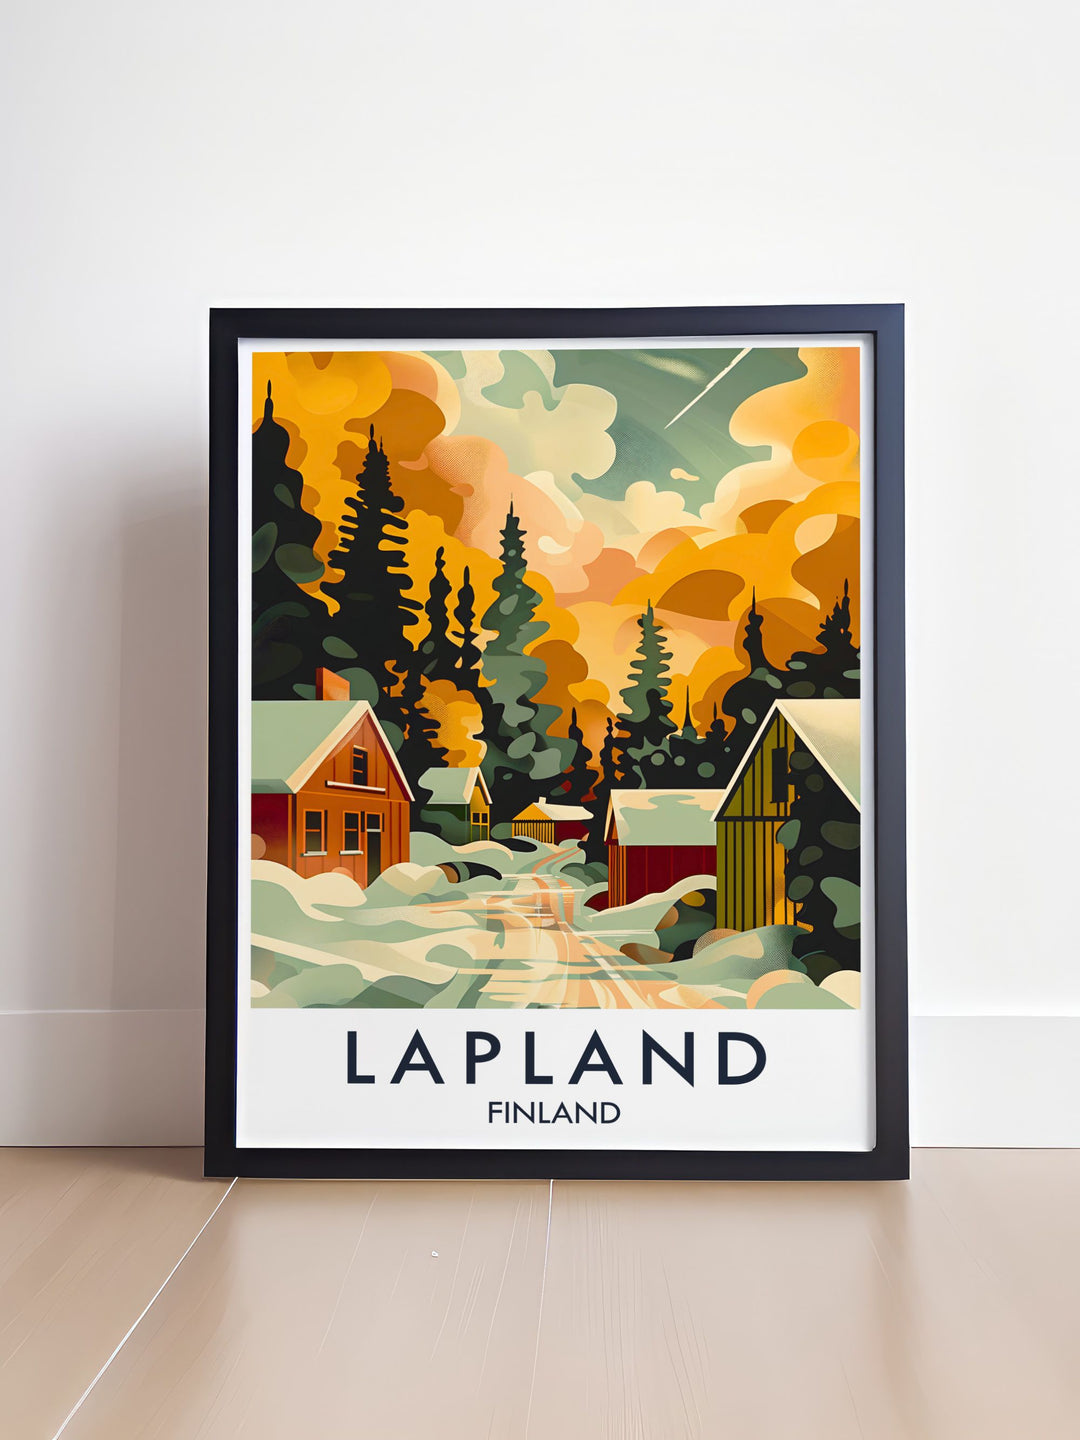 Finland Travel Print featuring Santa Claus Town and its festive charm perfect for those who love unique travel destinations and holiday decor creating a stunning piece of wall art for any space.